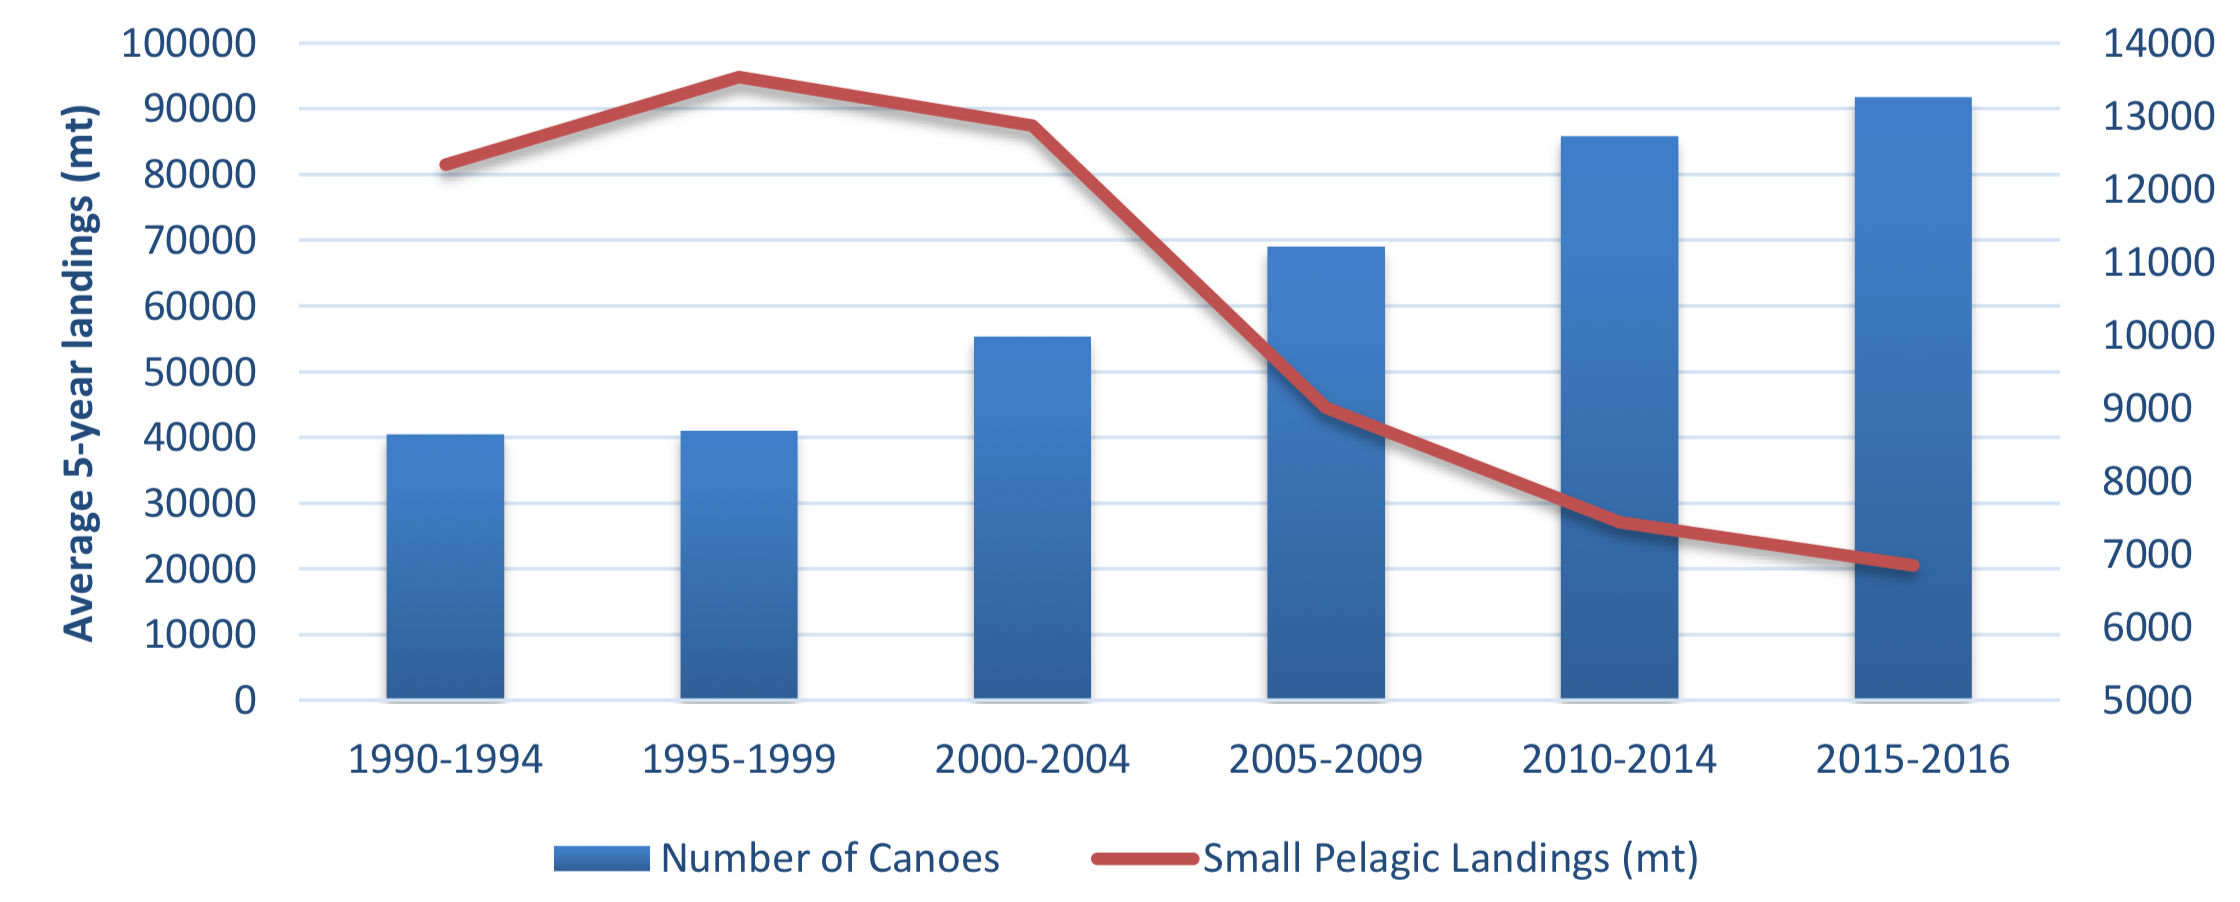 Landings of small pelagic stocks (sardinella, anchovy and mackerel) and effort in number of canoes targeting small pelagics from 1990 to 2016.